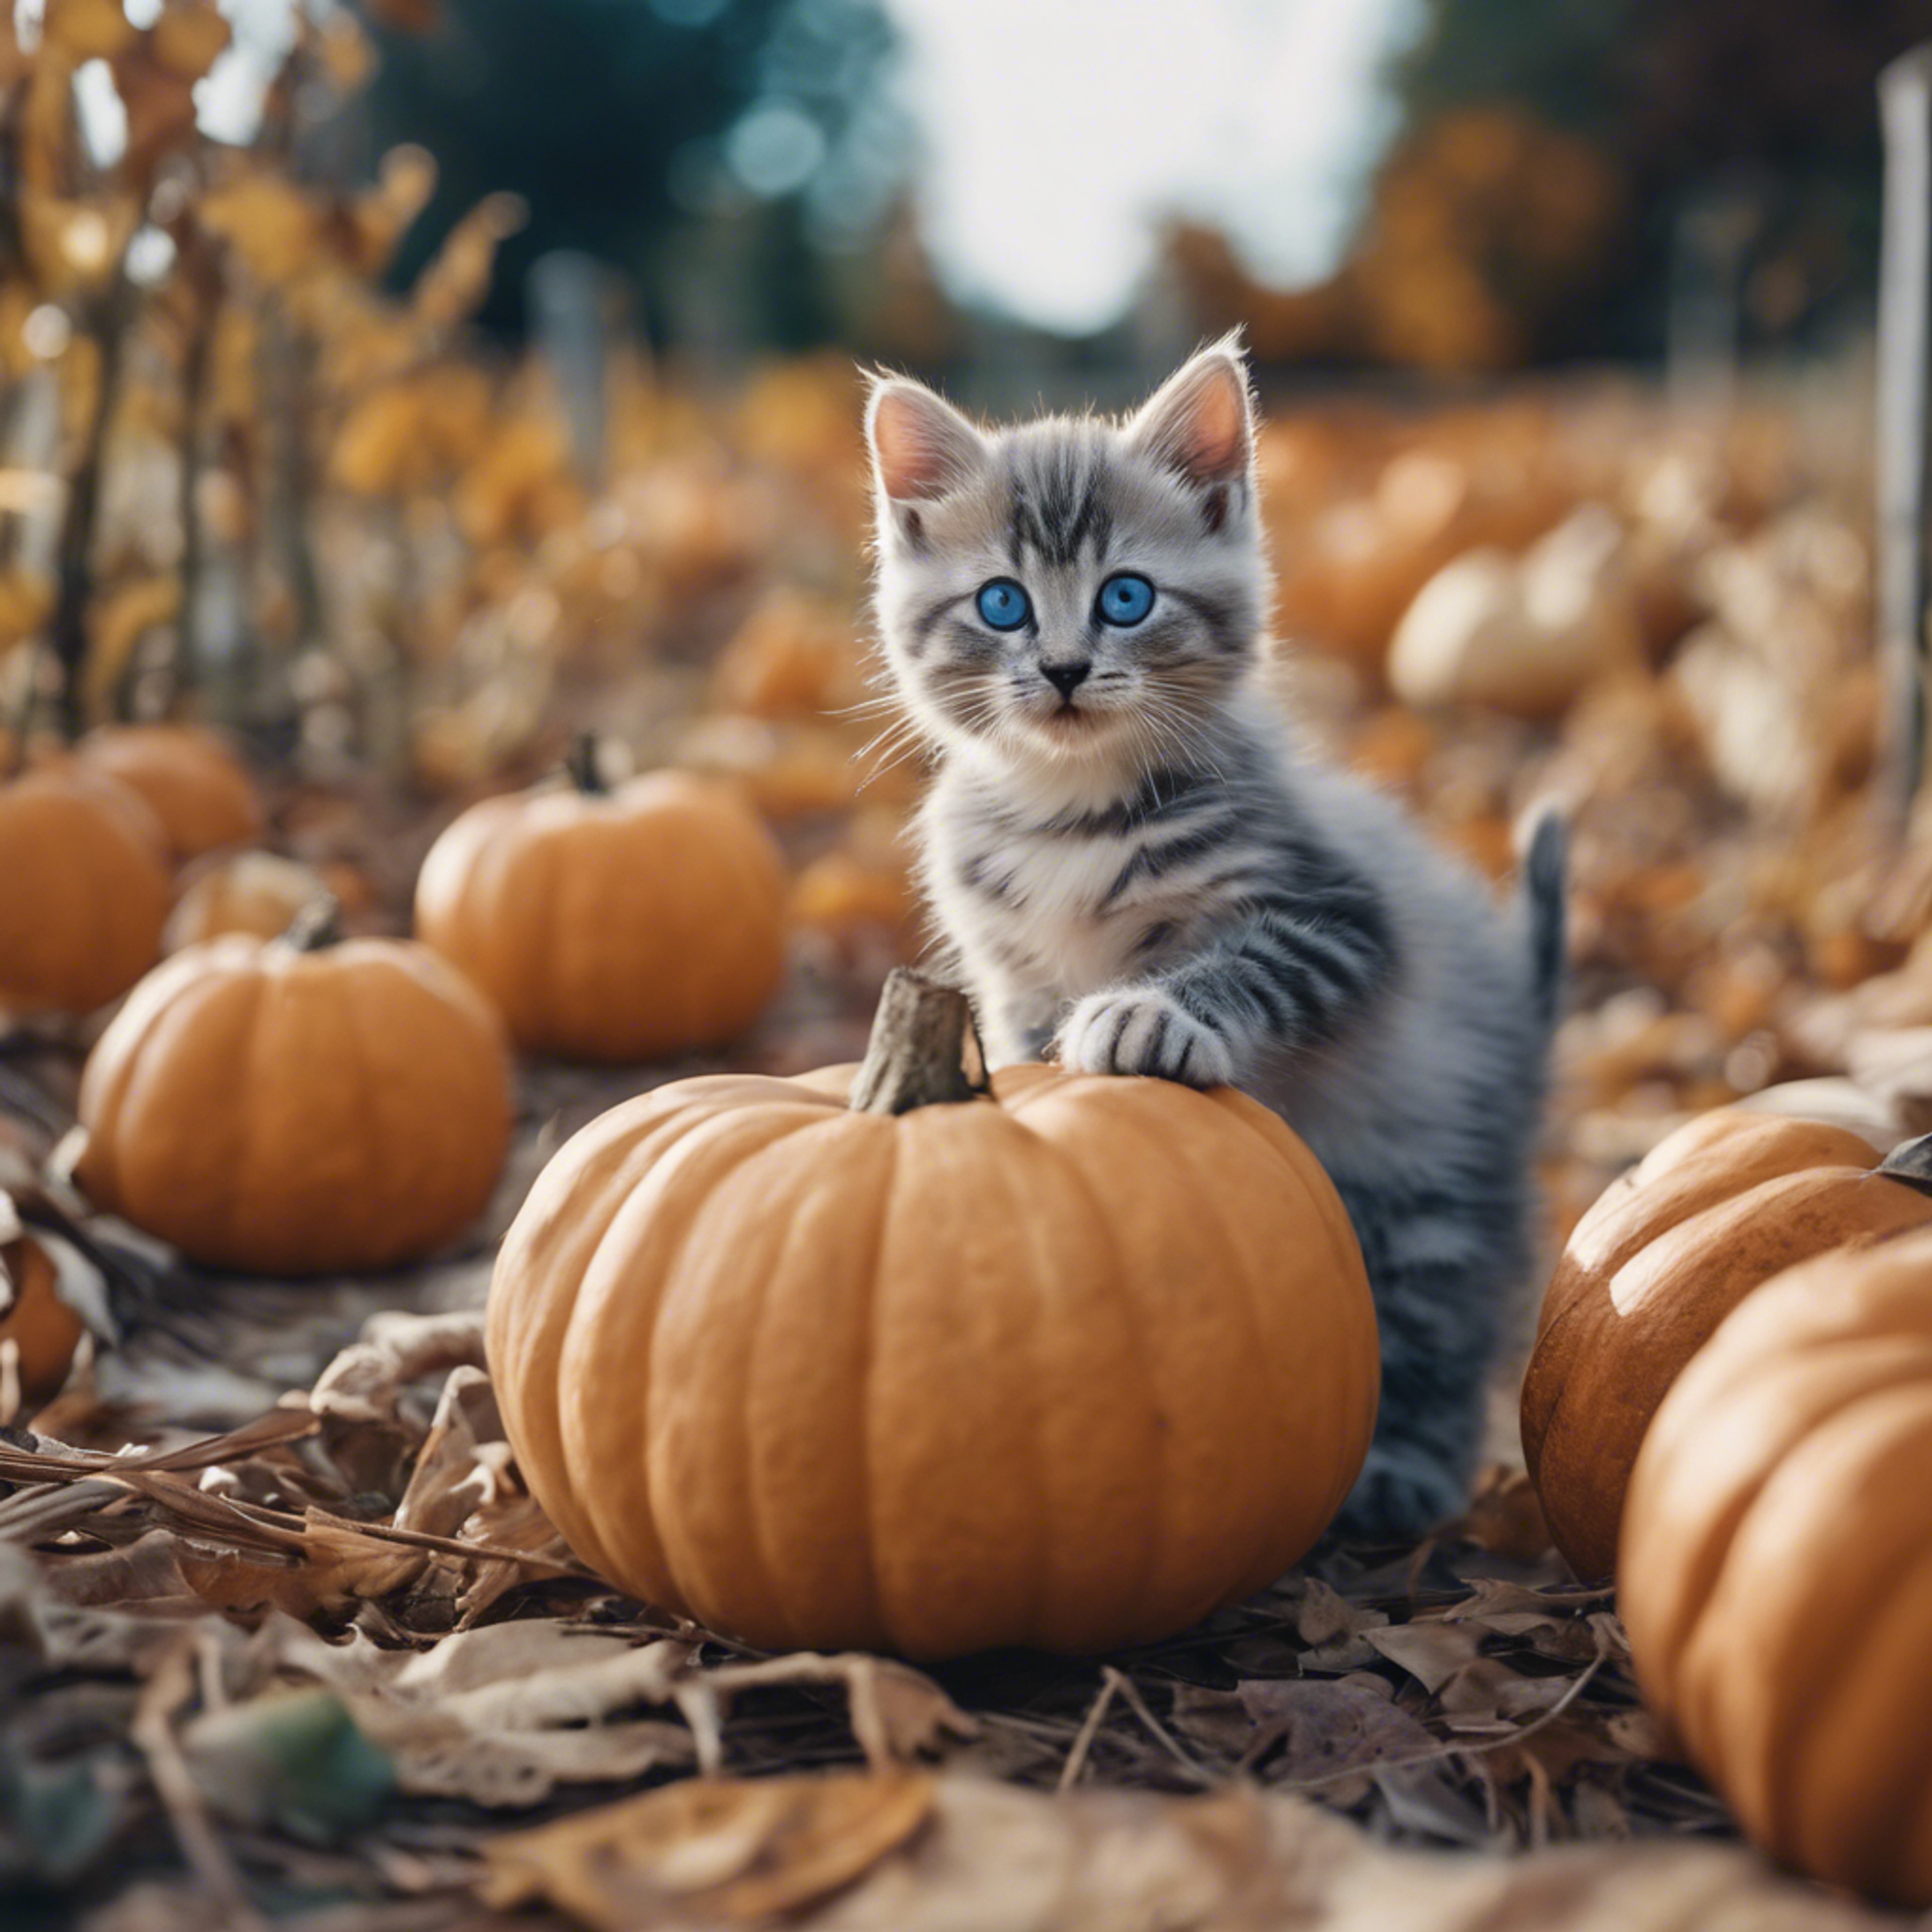 A small blue-eyed Cheetoh kitten exploring a pumpkin patch on an invitingly cool fall day. Tapeta[ee8fc80847a940e288a7]